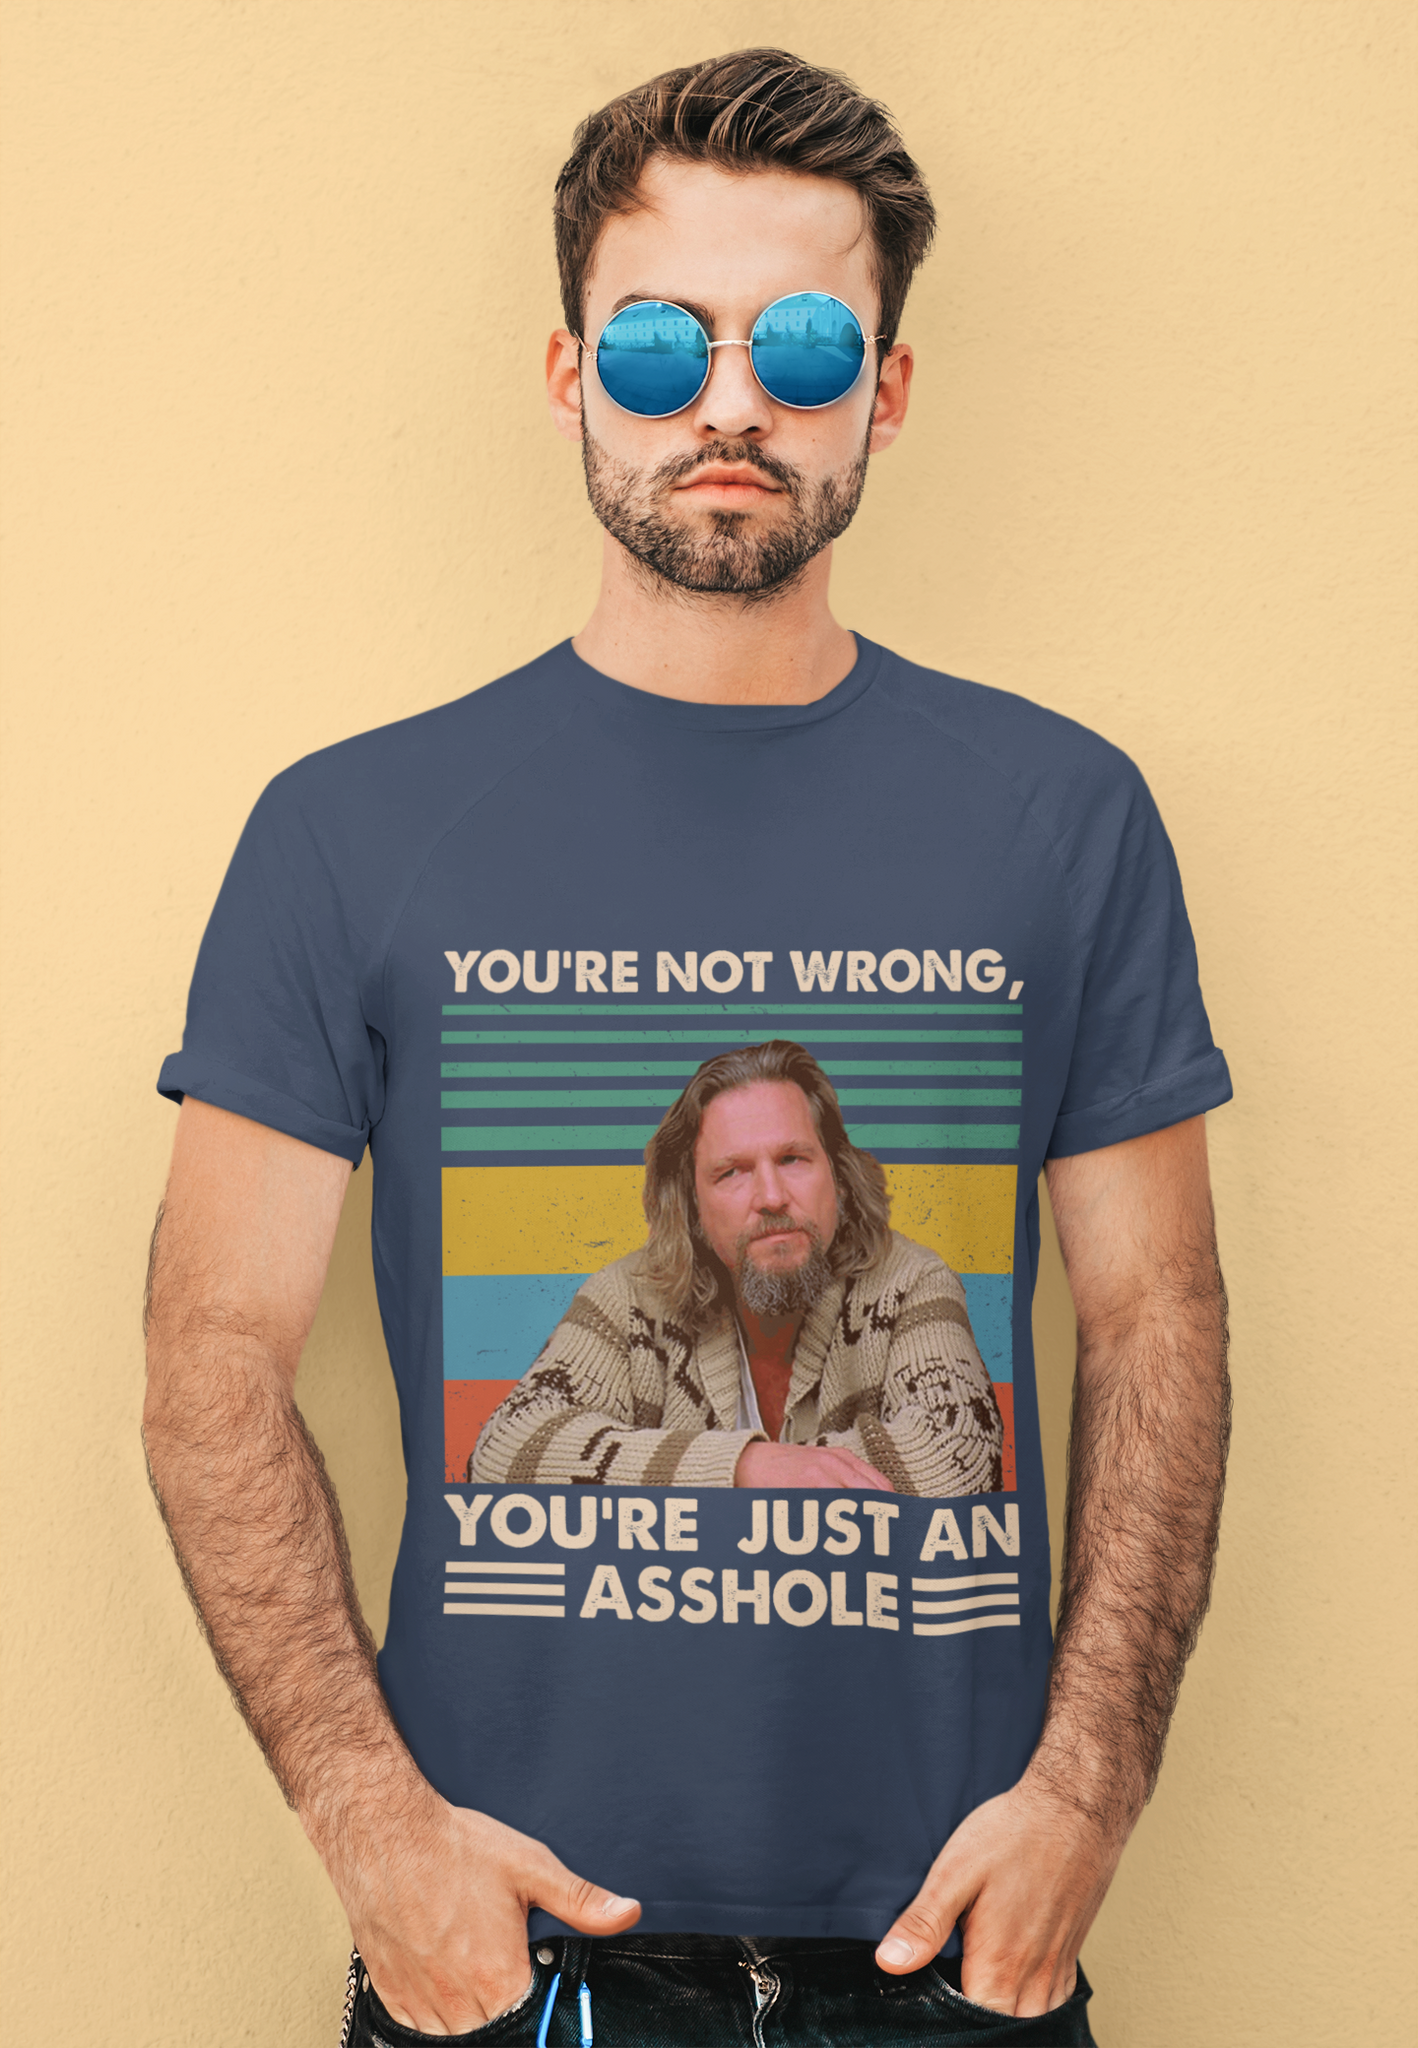 The Big Lebowski Vintage T Shirt, Youre Not Wrong Youre Just An Asshole Tshirt, The Dude T Shirt